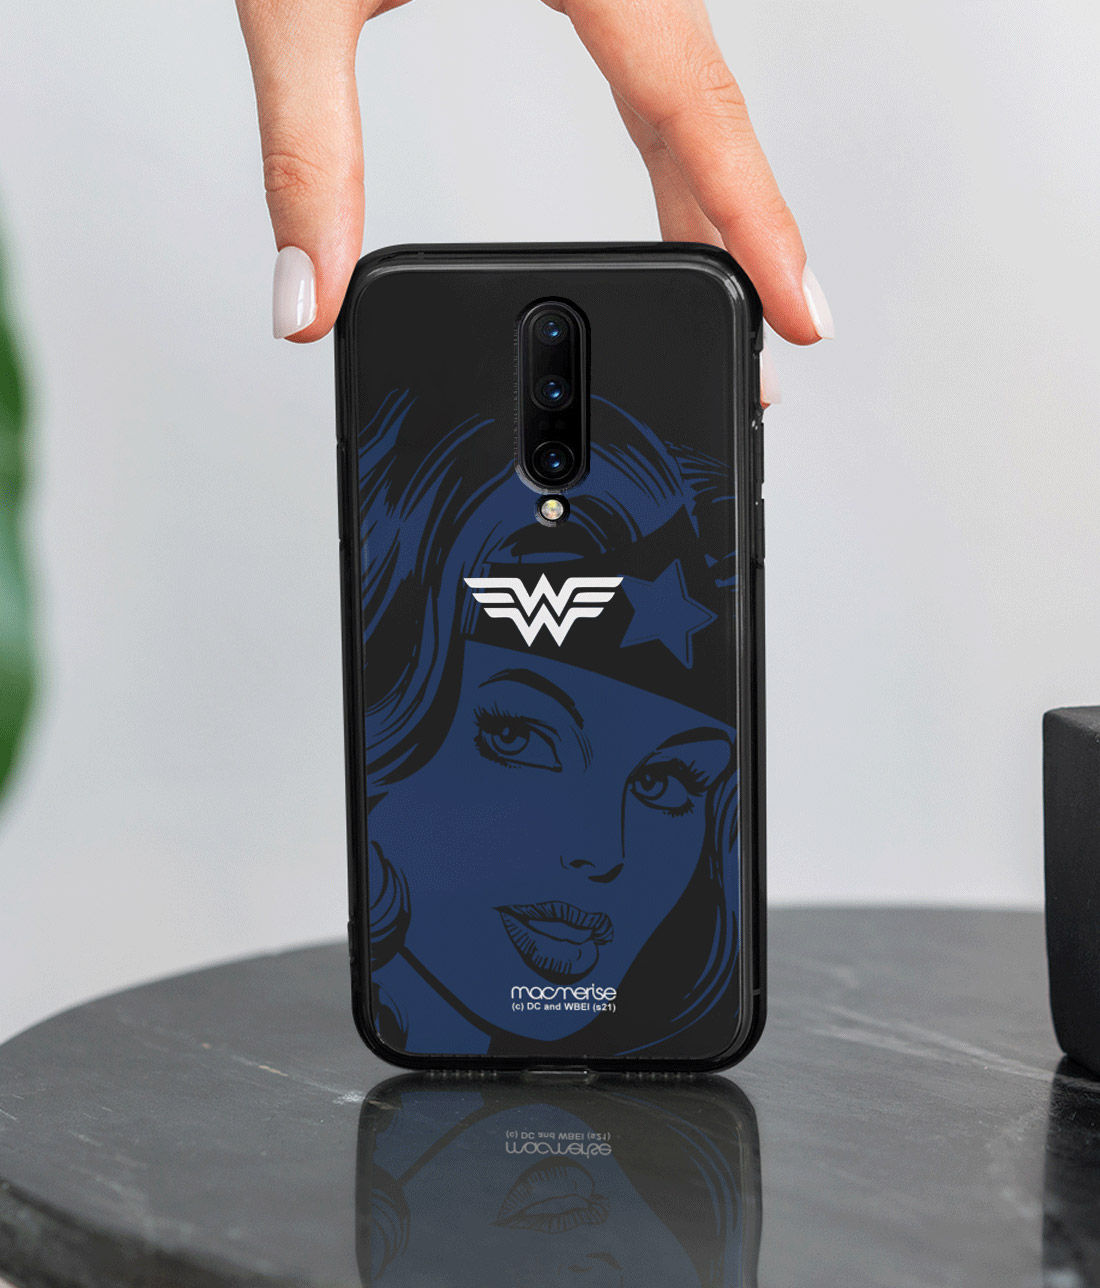 Silhouette Wonder Woman - Lumous LED Phone Case for OnePlus 8